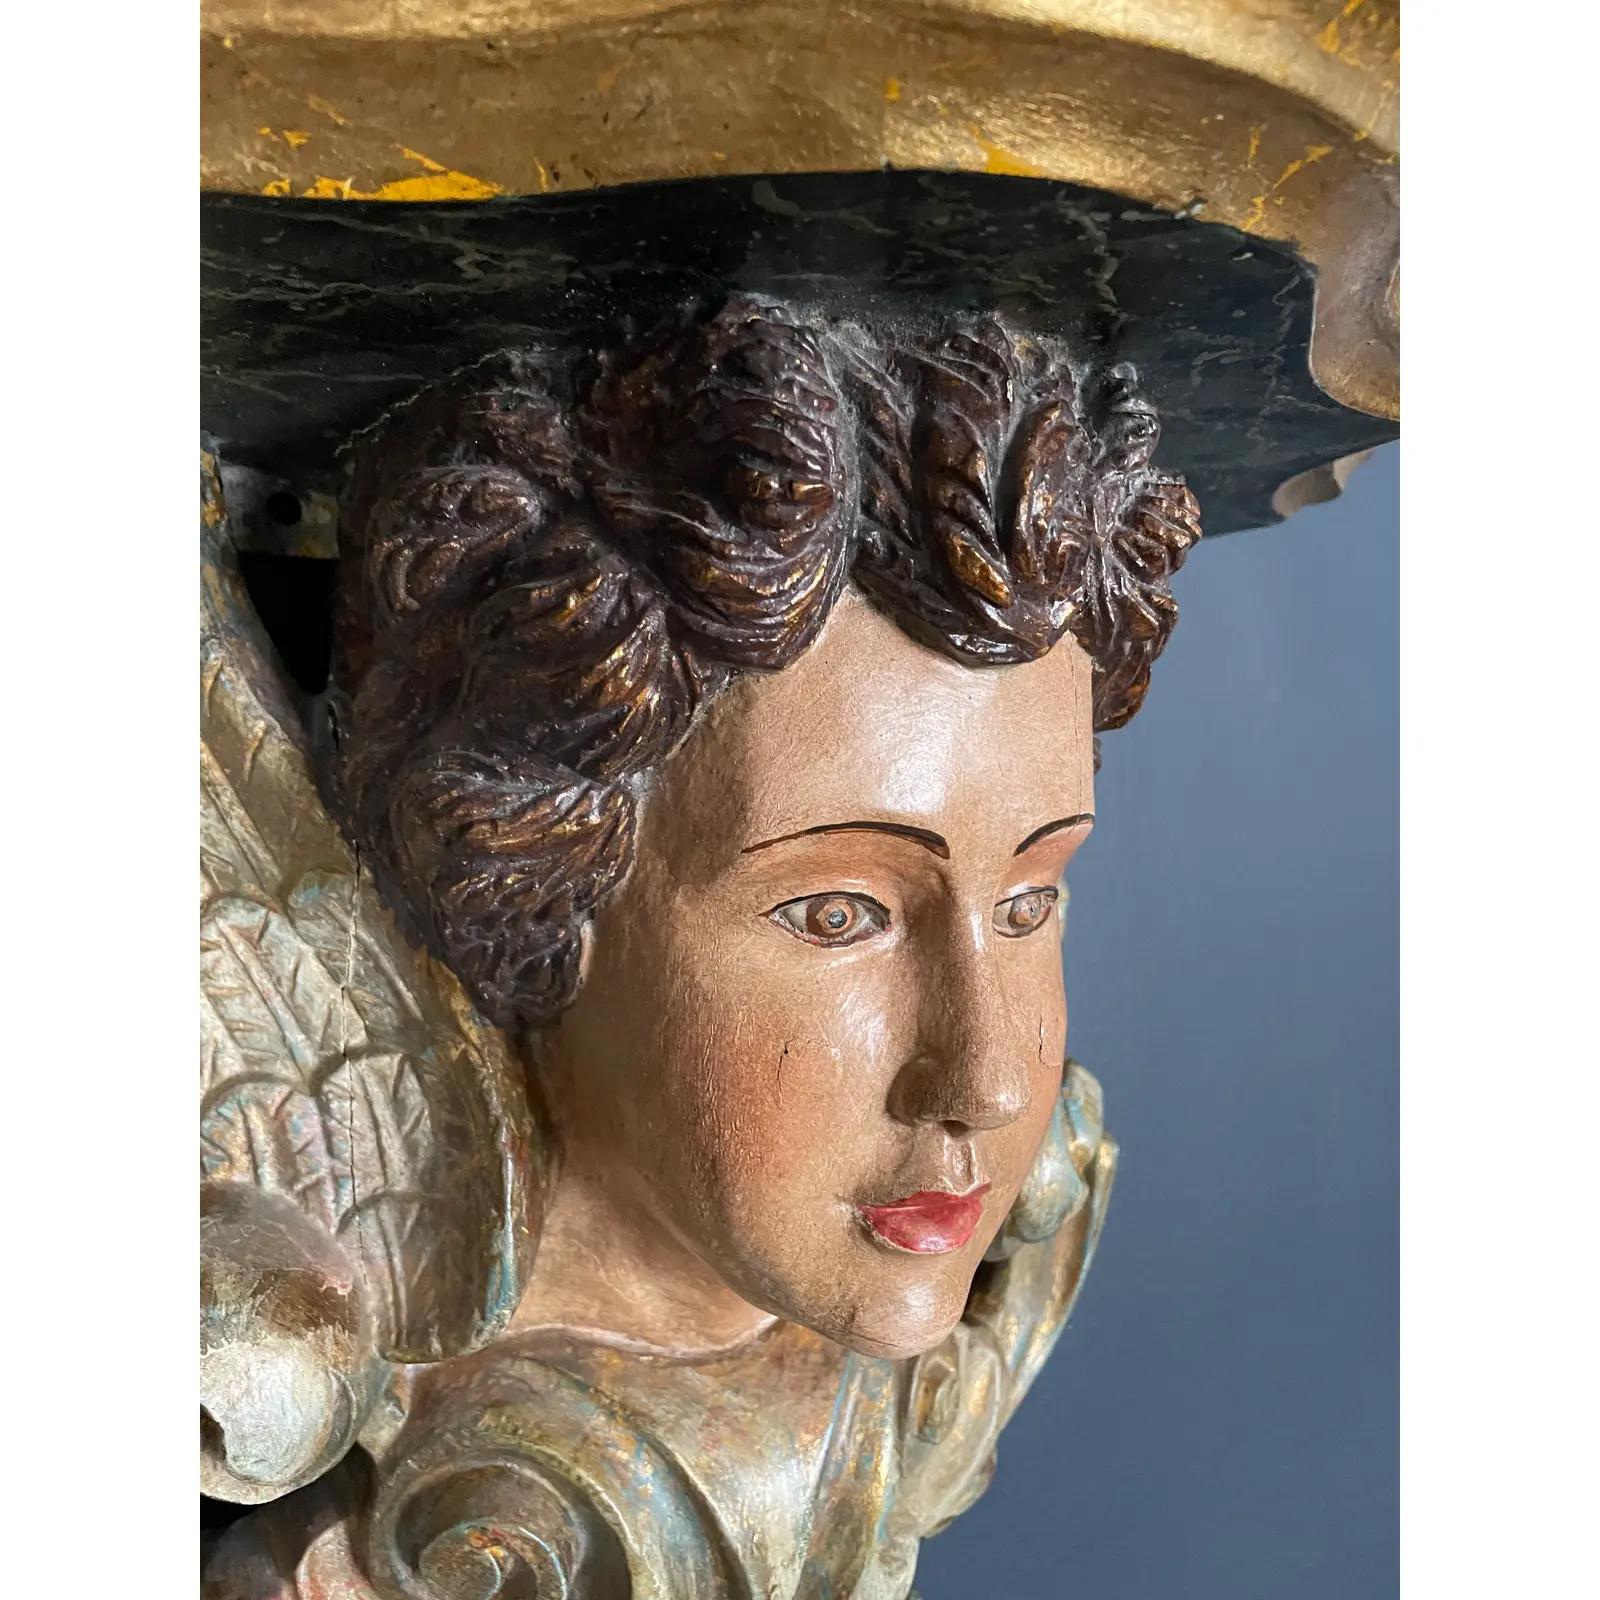 Beautifully appointed sculptural wall shelf. Angelic figure with wings. Hand painted possibly Italian.